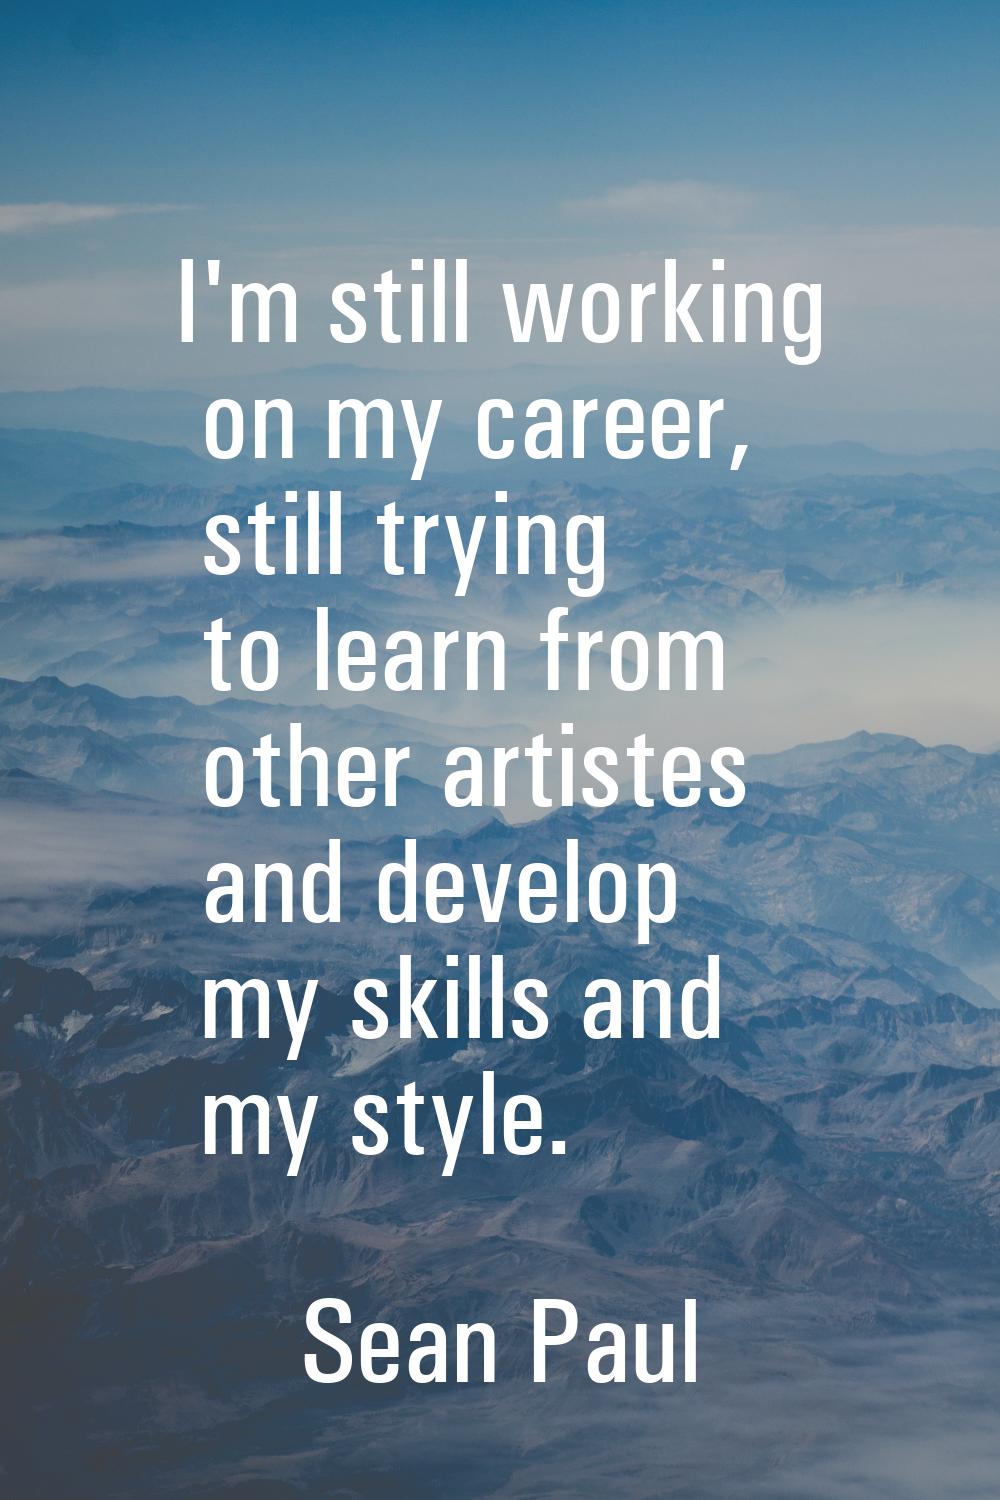 I'm still working on my career, still trying to learn from other artistes and develop my skills and